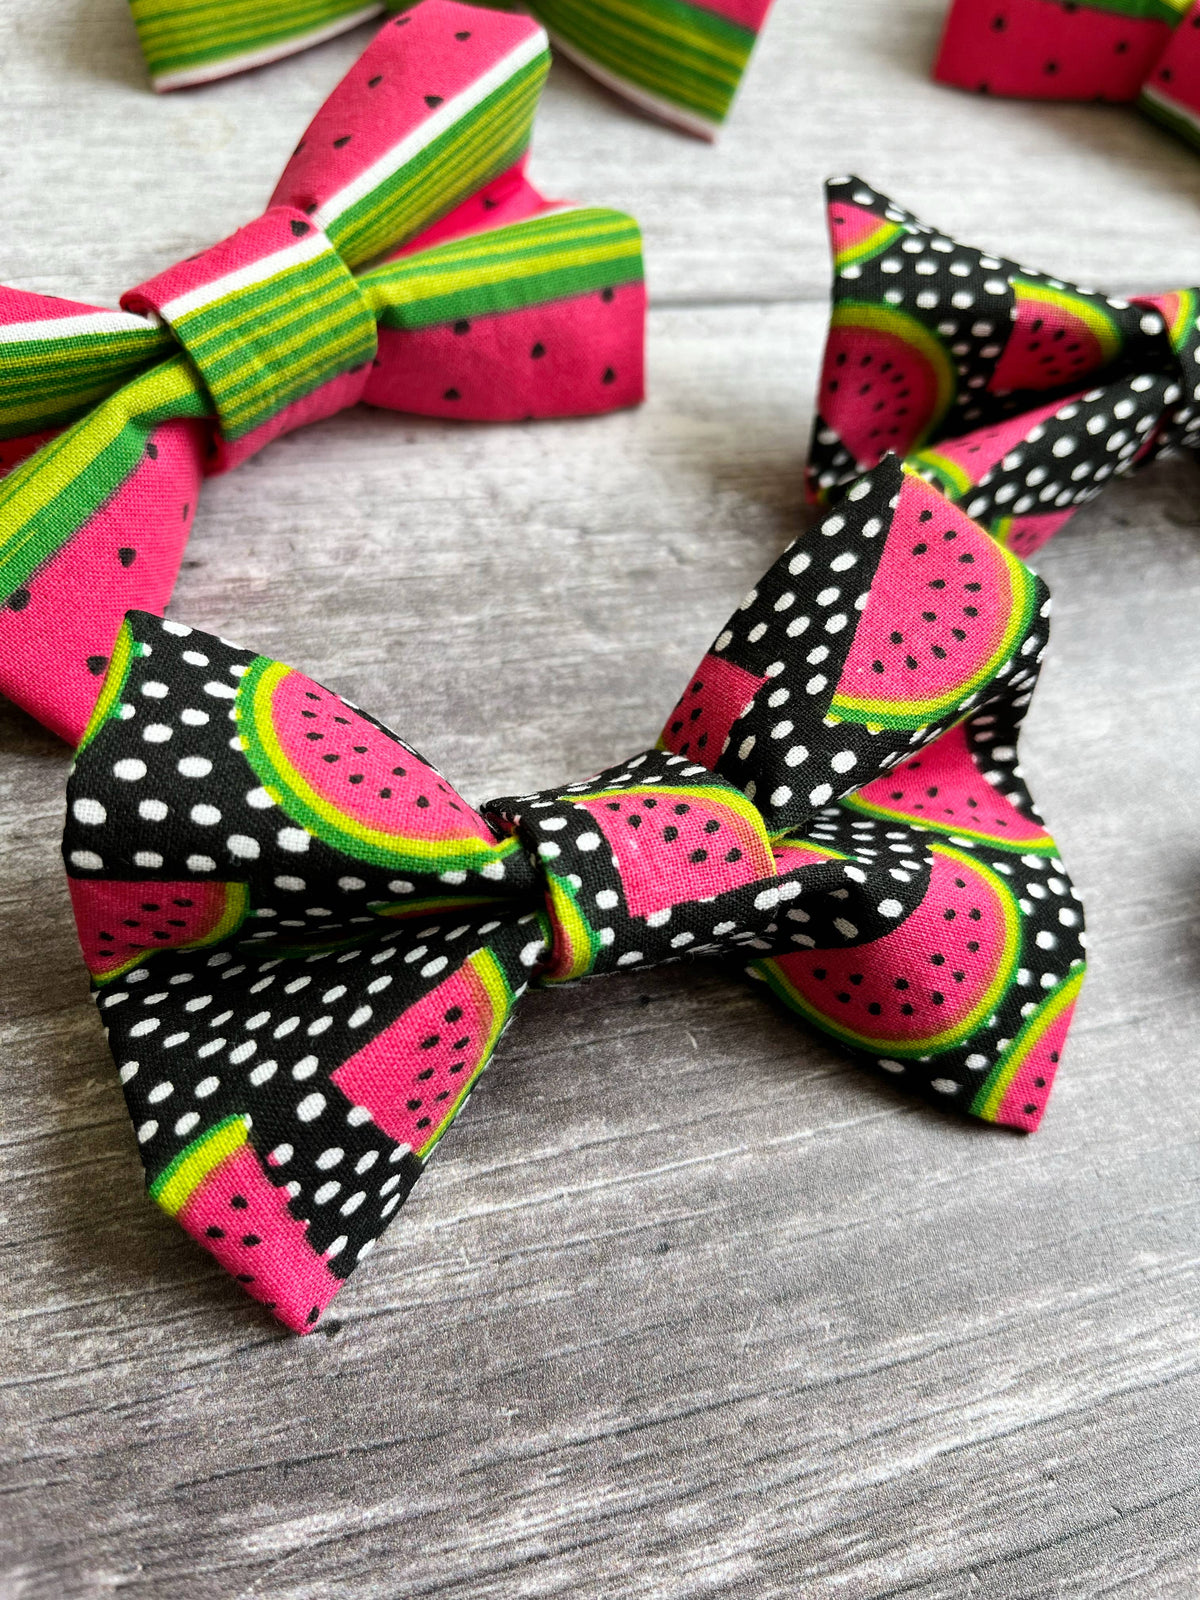 Baxter's Boutique - Bow Tie | Watermelon Polka Dog Bow